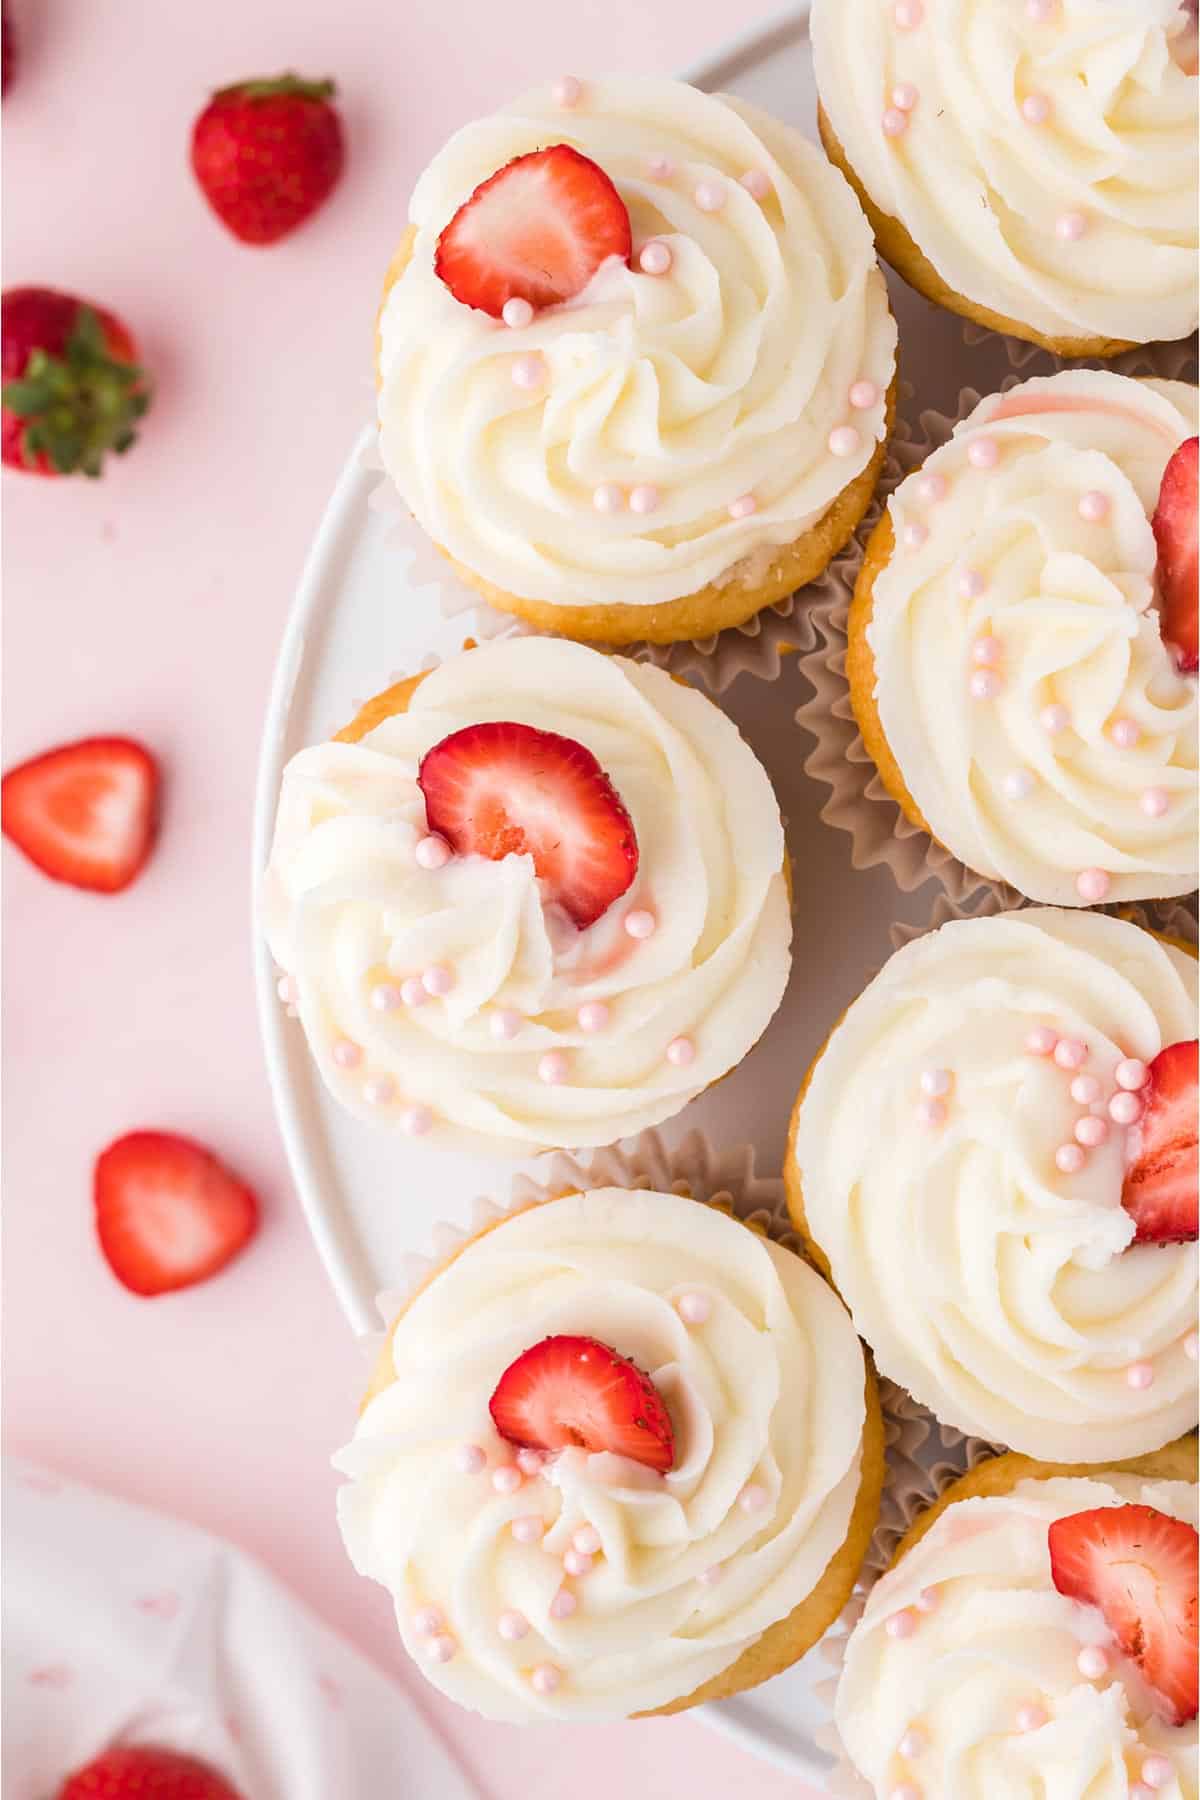 A plate of strawberry filled cupcakes with icing and strawberries for garnish.